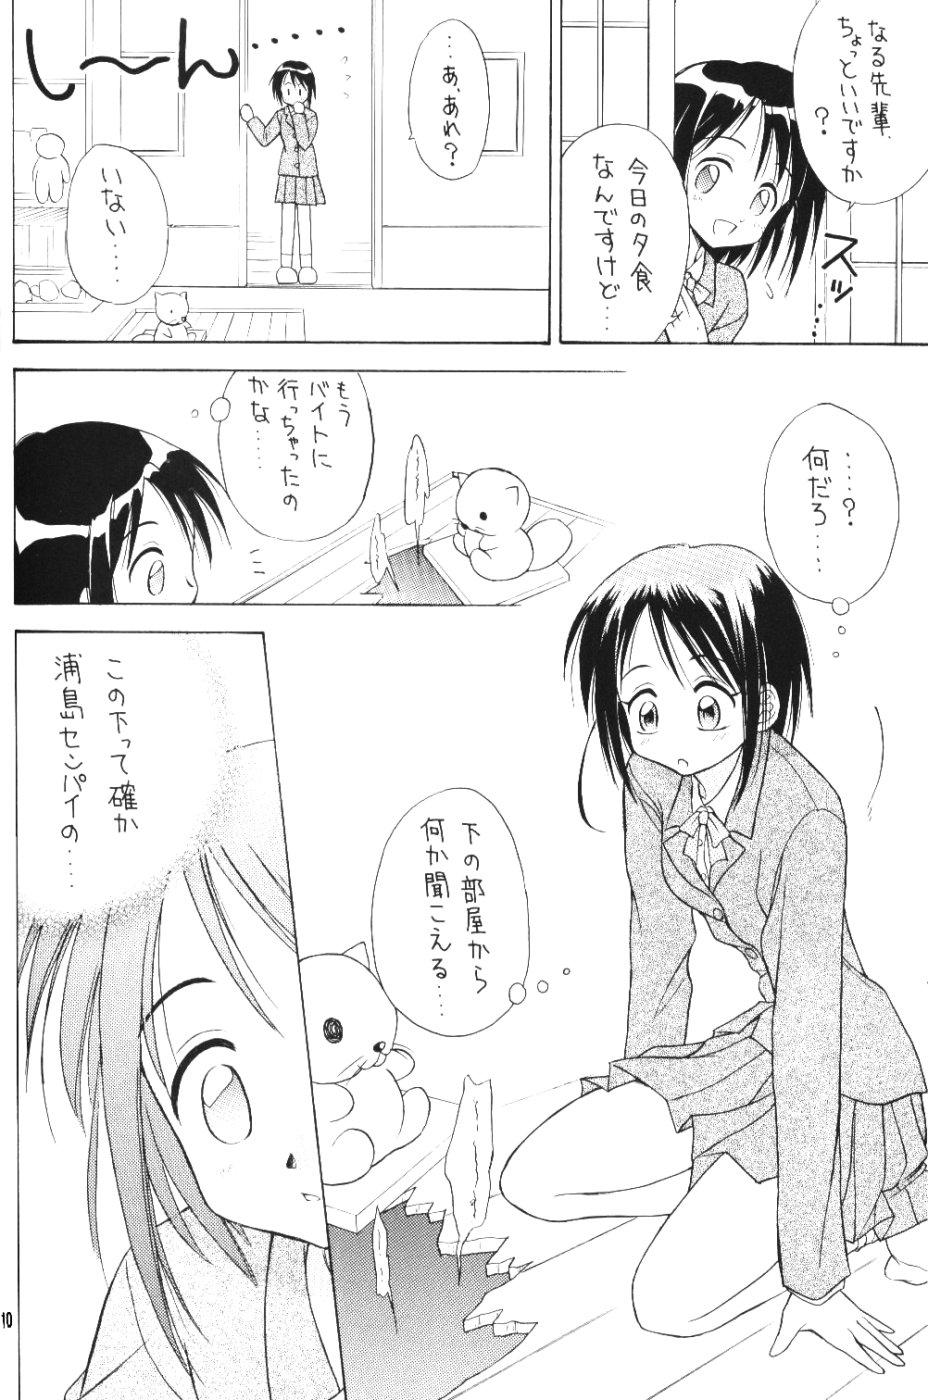 Piroca Lovely 4 - Love hina Gay Amateur - Page 9